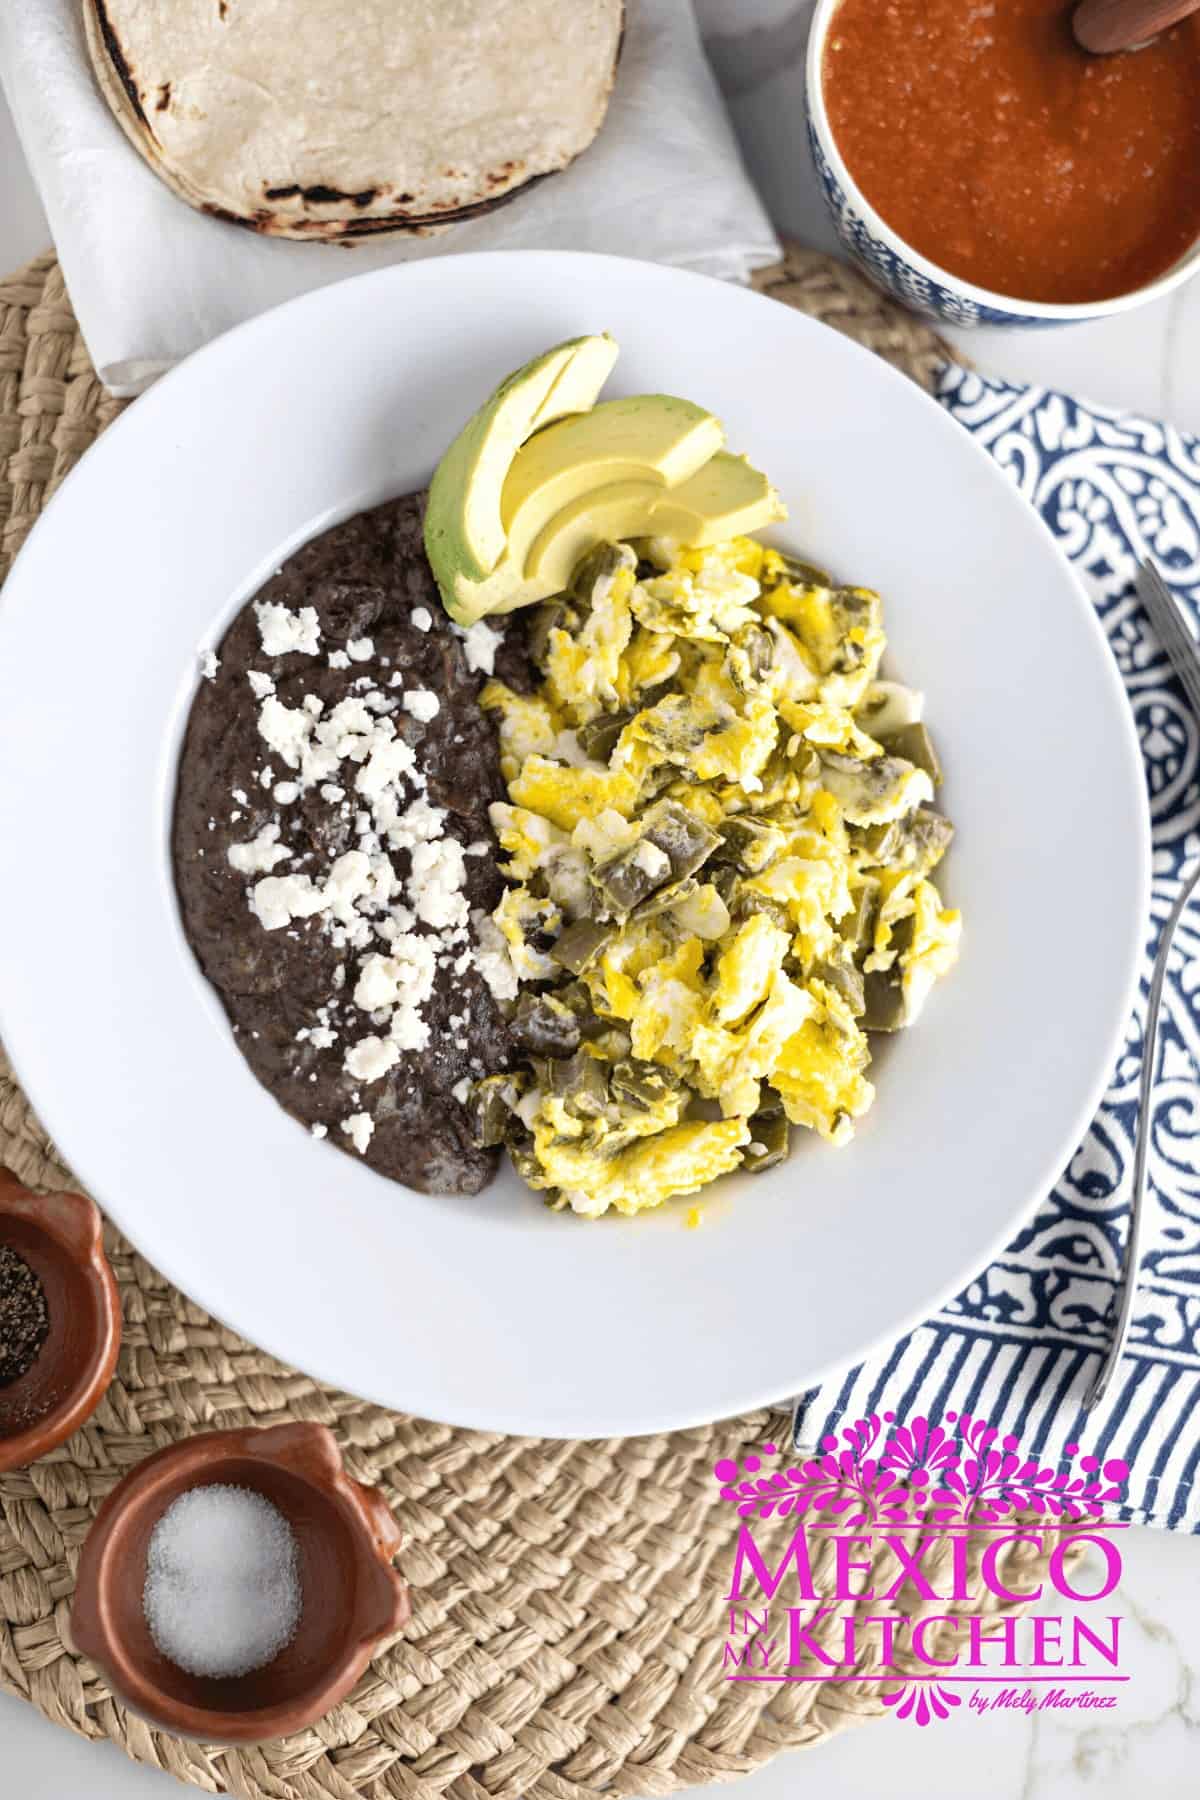 Serving of nopales con huevos next to black beans in a white plate.